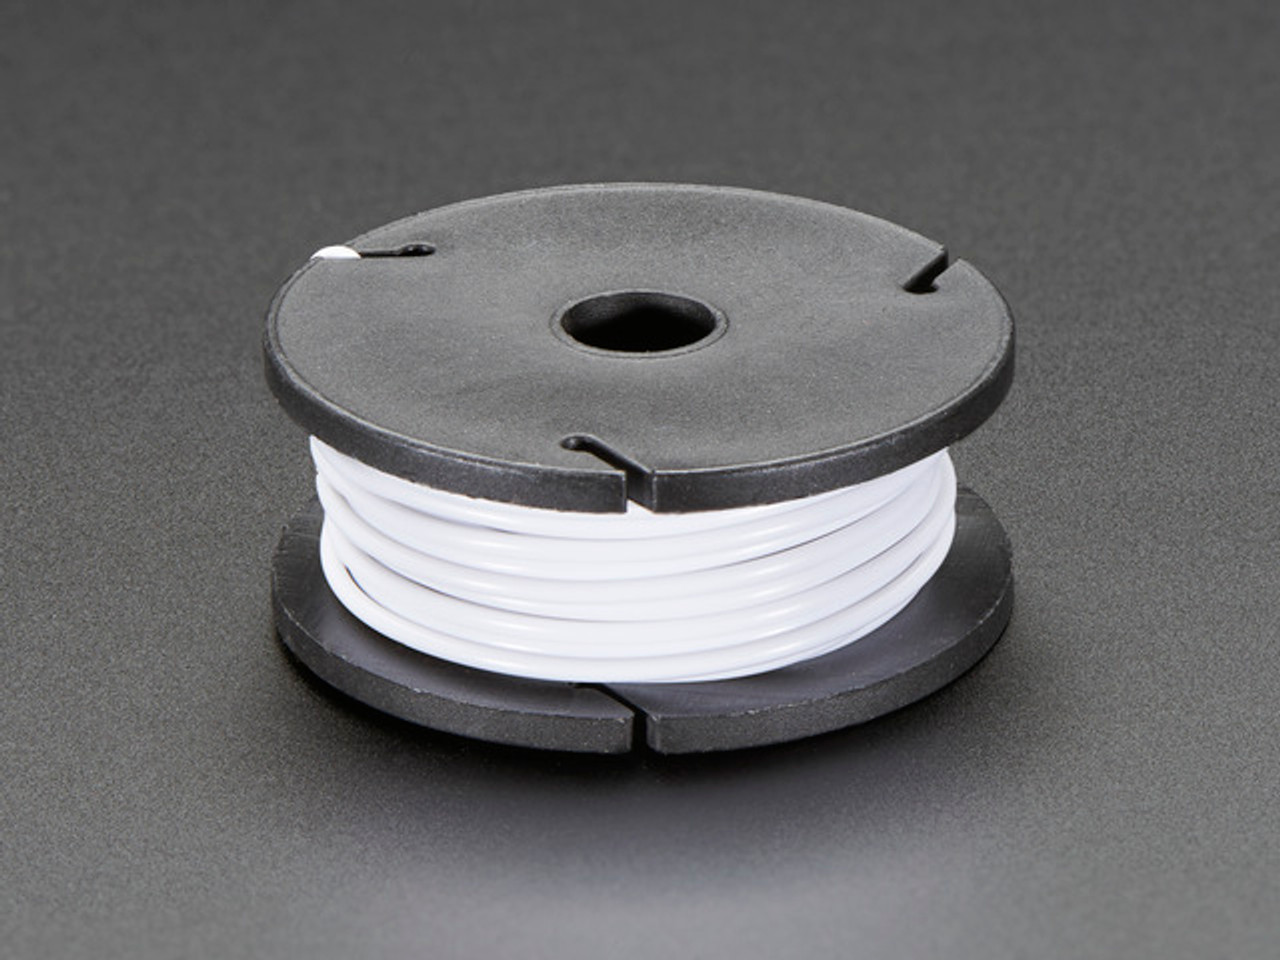 Prototyping Wire Spool Set - 6 Spool Stranded Core